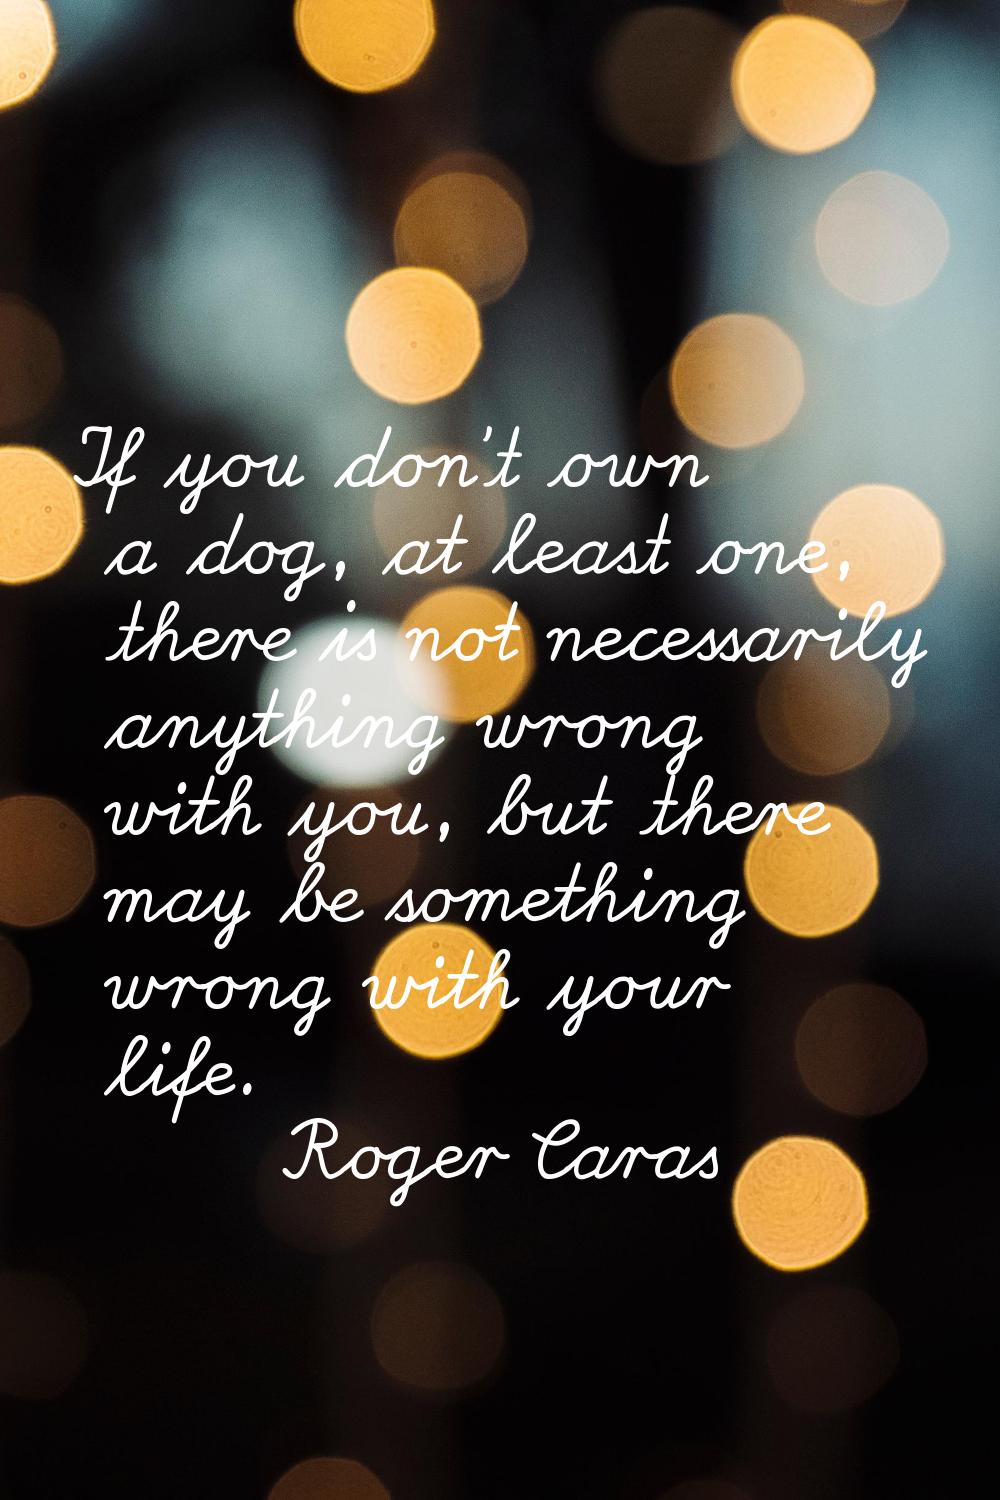 If you don't own a dog, at least one, there is not necessarily anything wrong with you, but there m